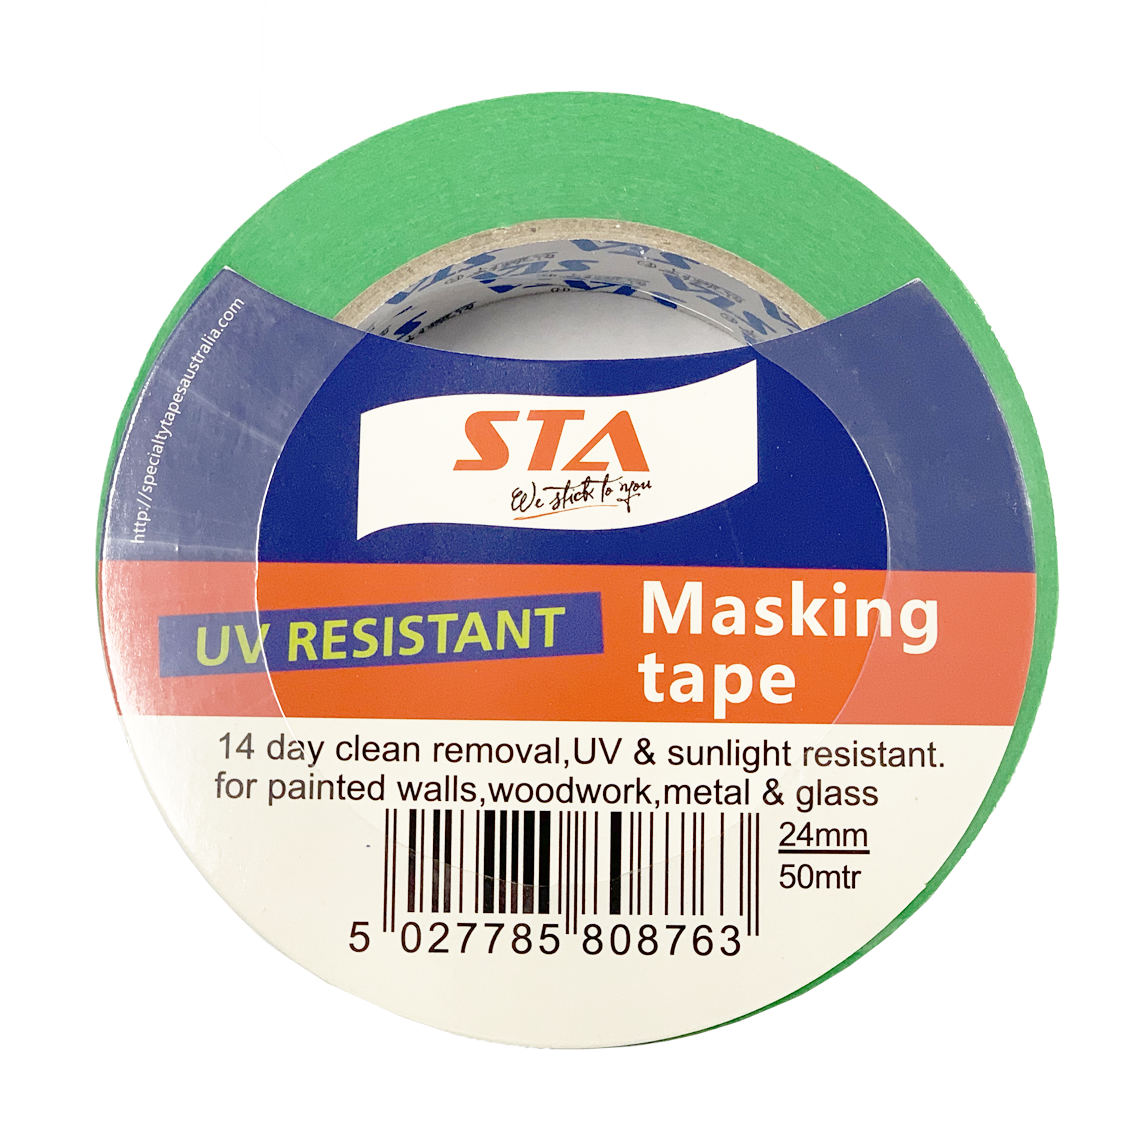 36mmx50m PAINTING MASKING TAPE WHITE, BLUE, GREEN 14 DAY UV RESIST MADE IN ITALY